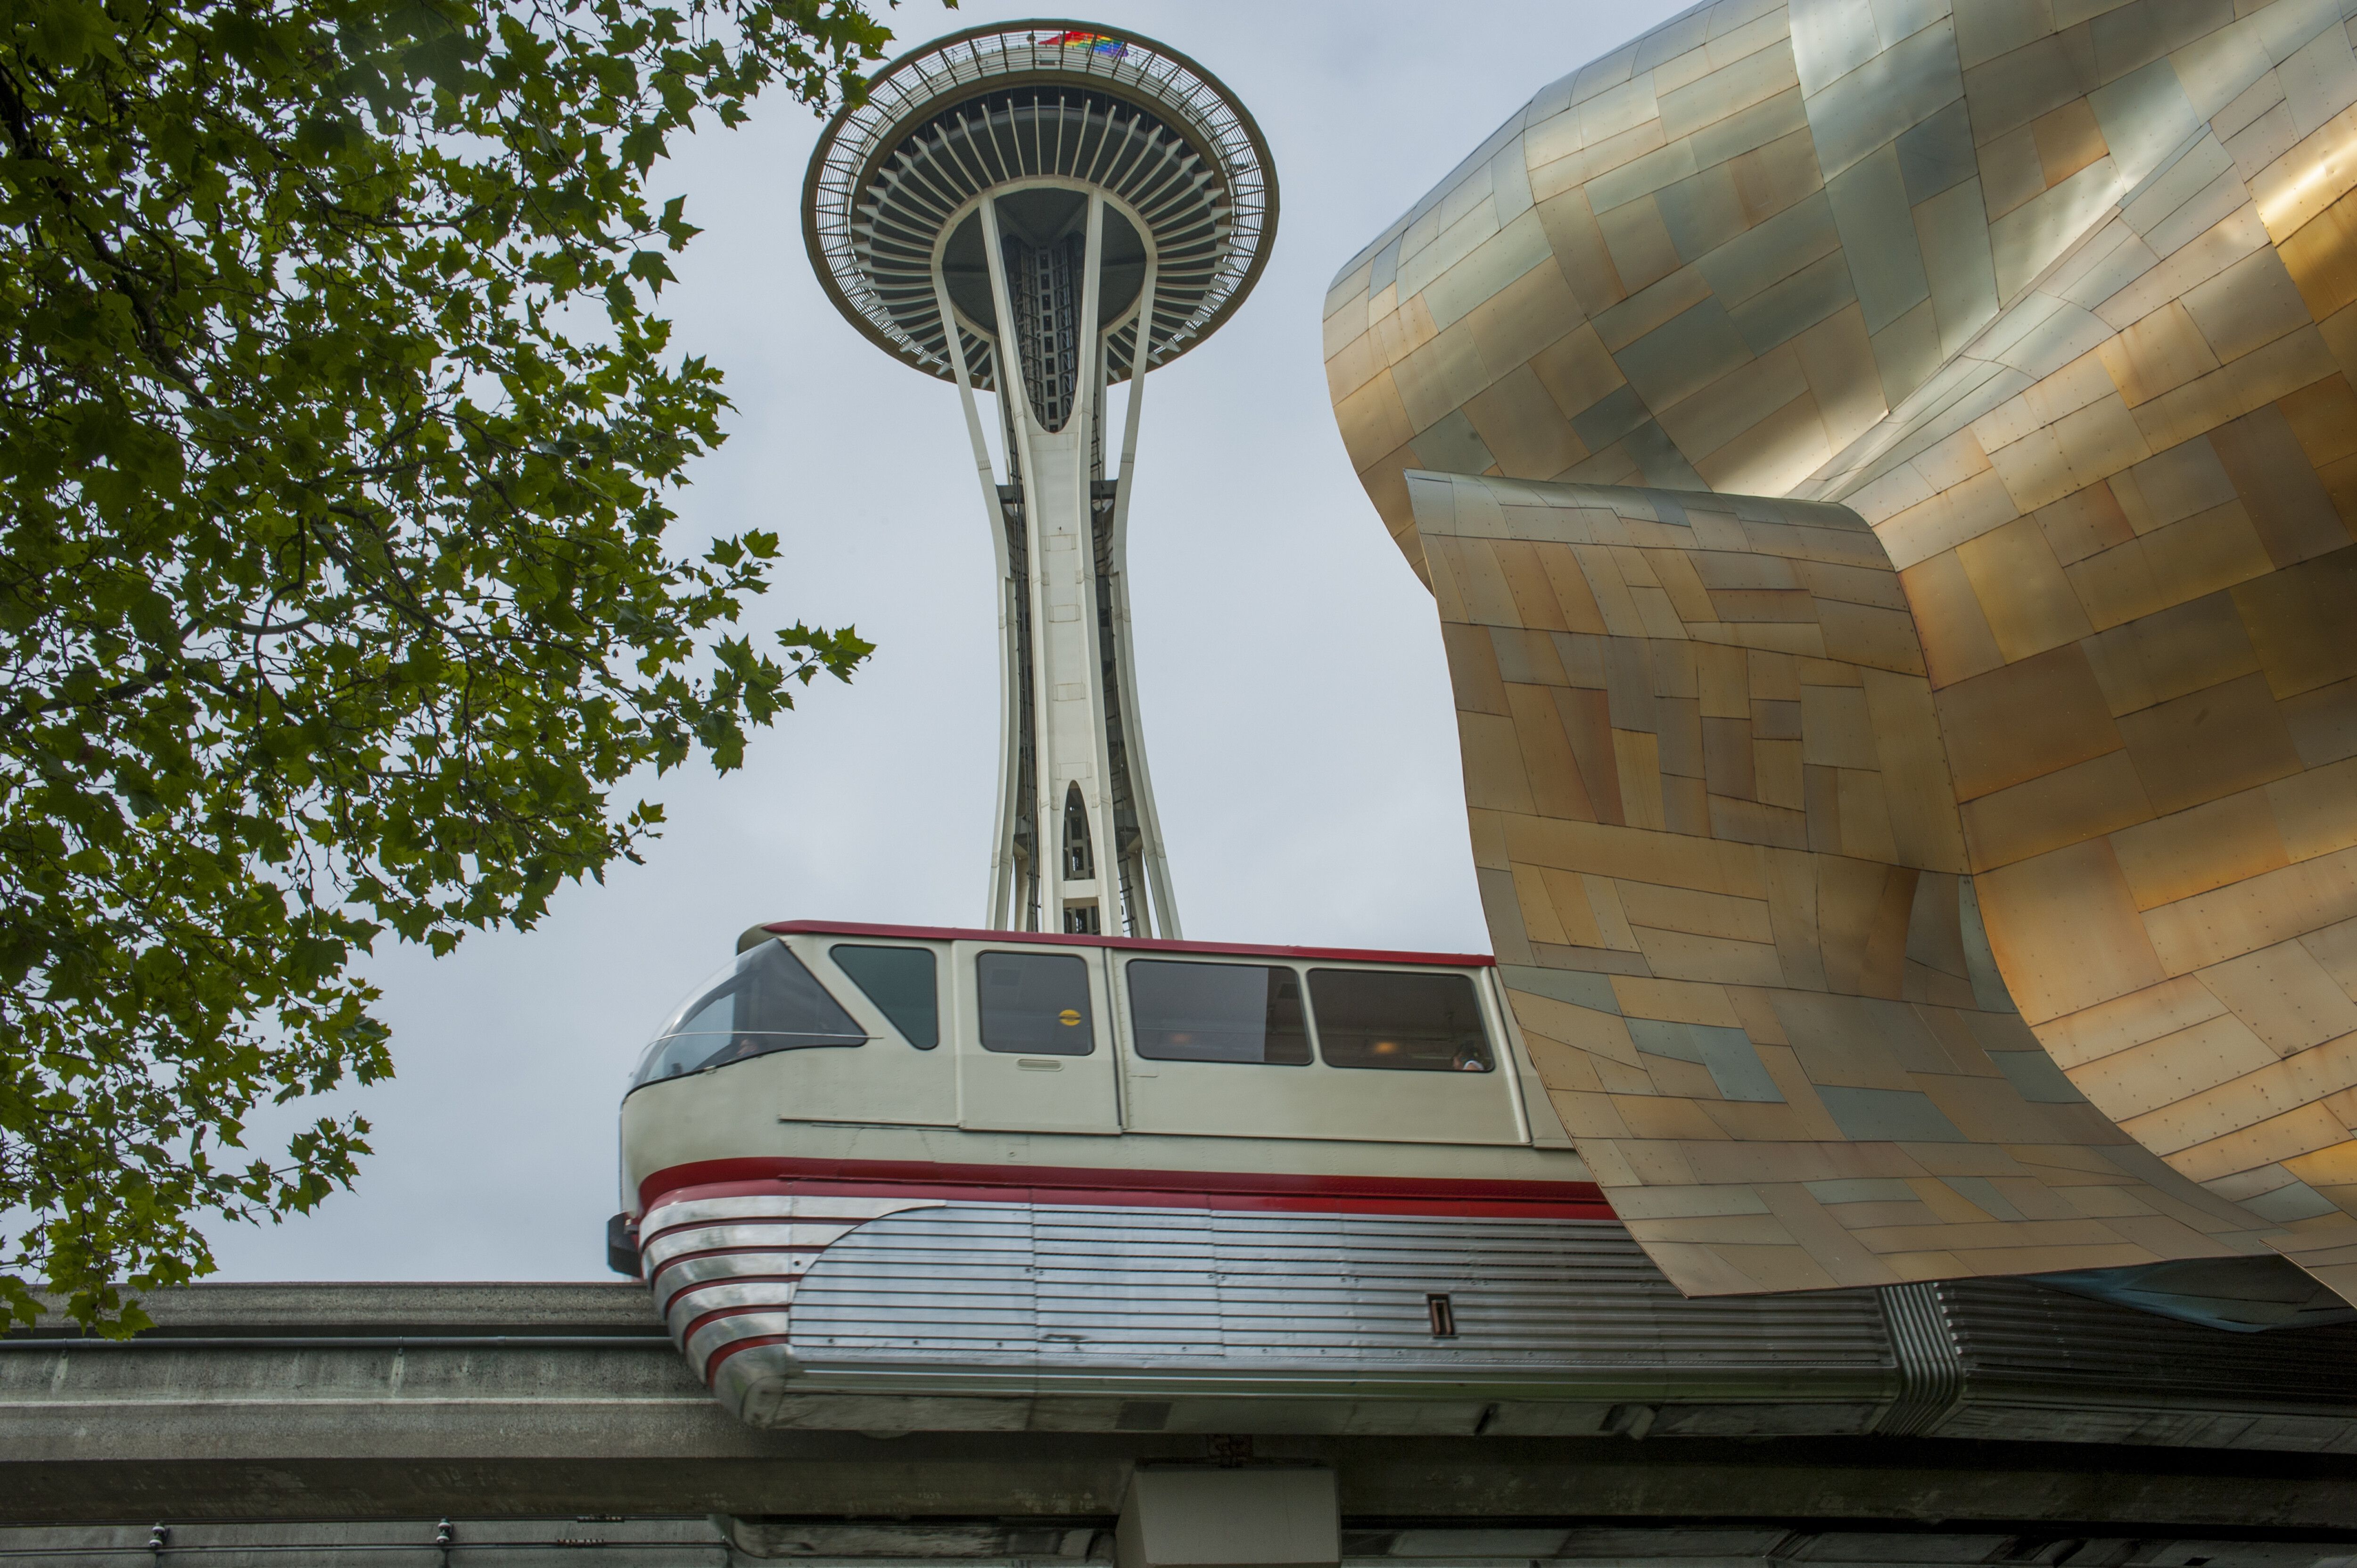 Monorail in front of the Space Needle